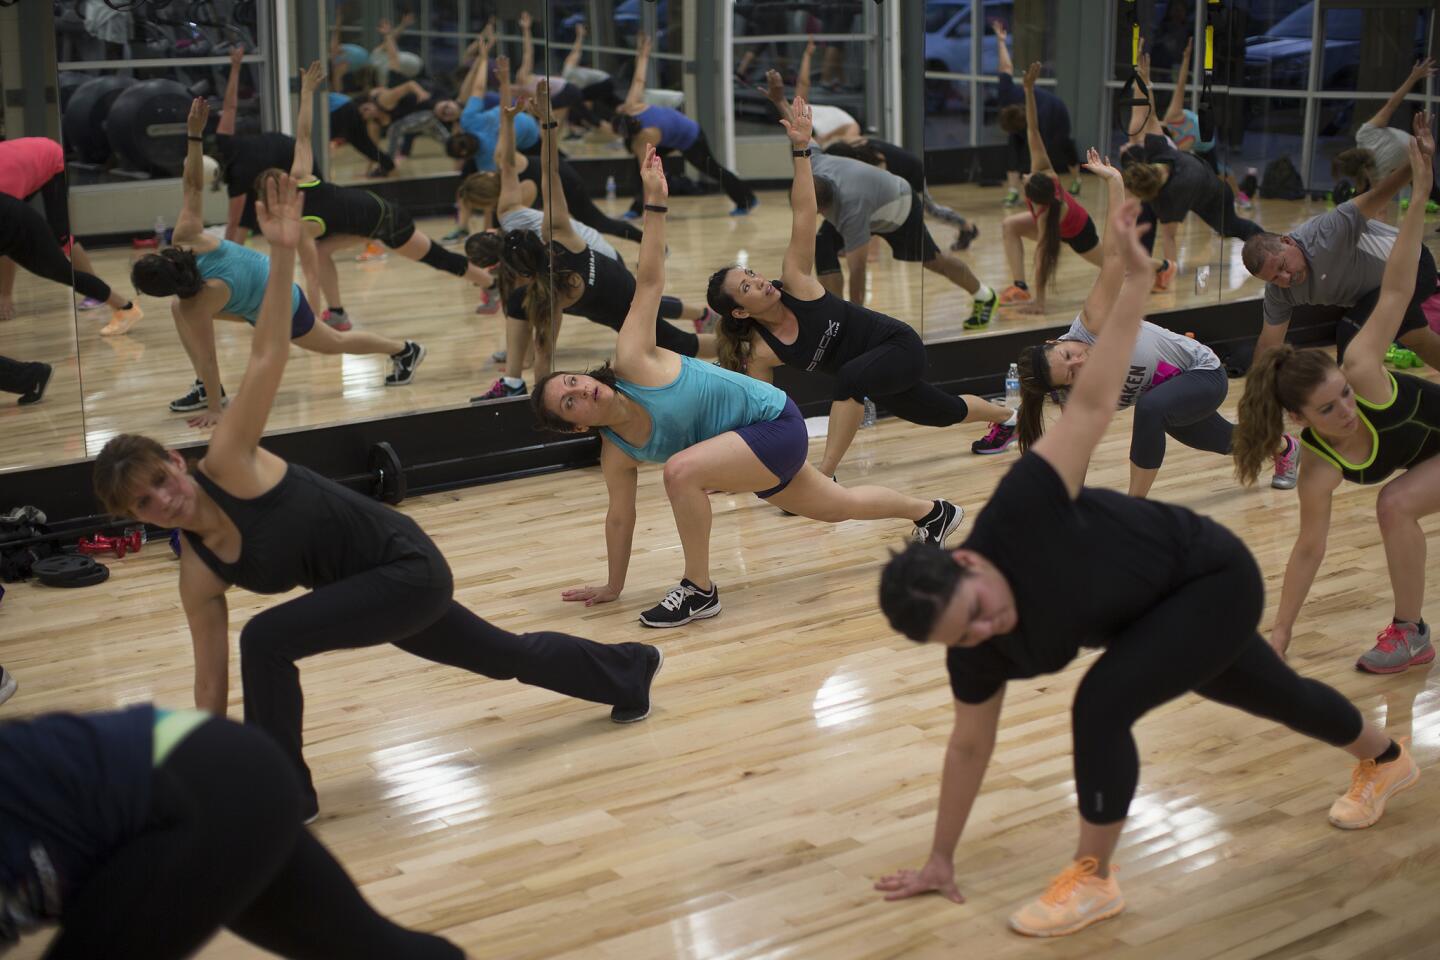 Participants stretch in unison during P90X training class at Fitness 19 in Chino.